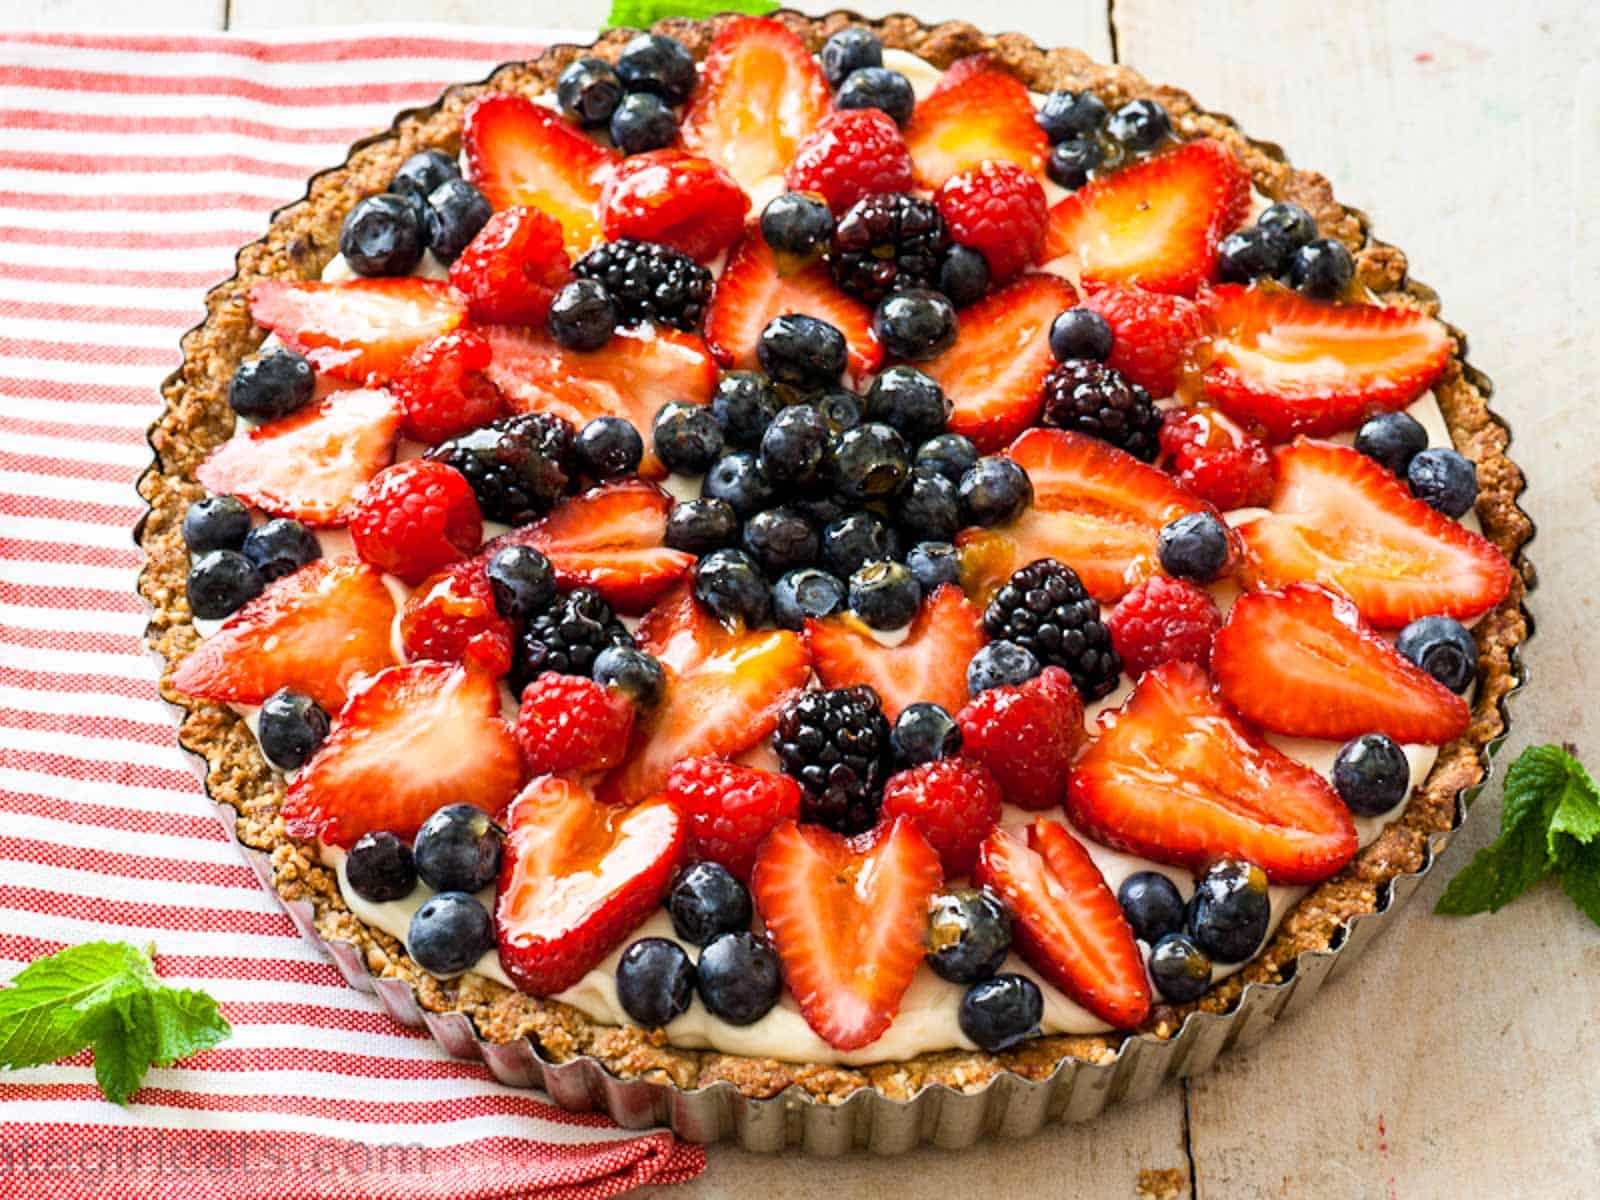 A large fruit tart made with strawberries, blueberries, and raspberries.